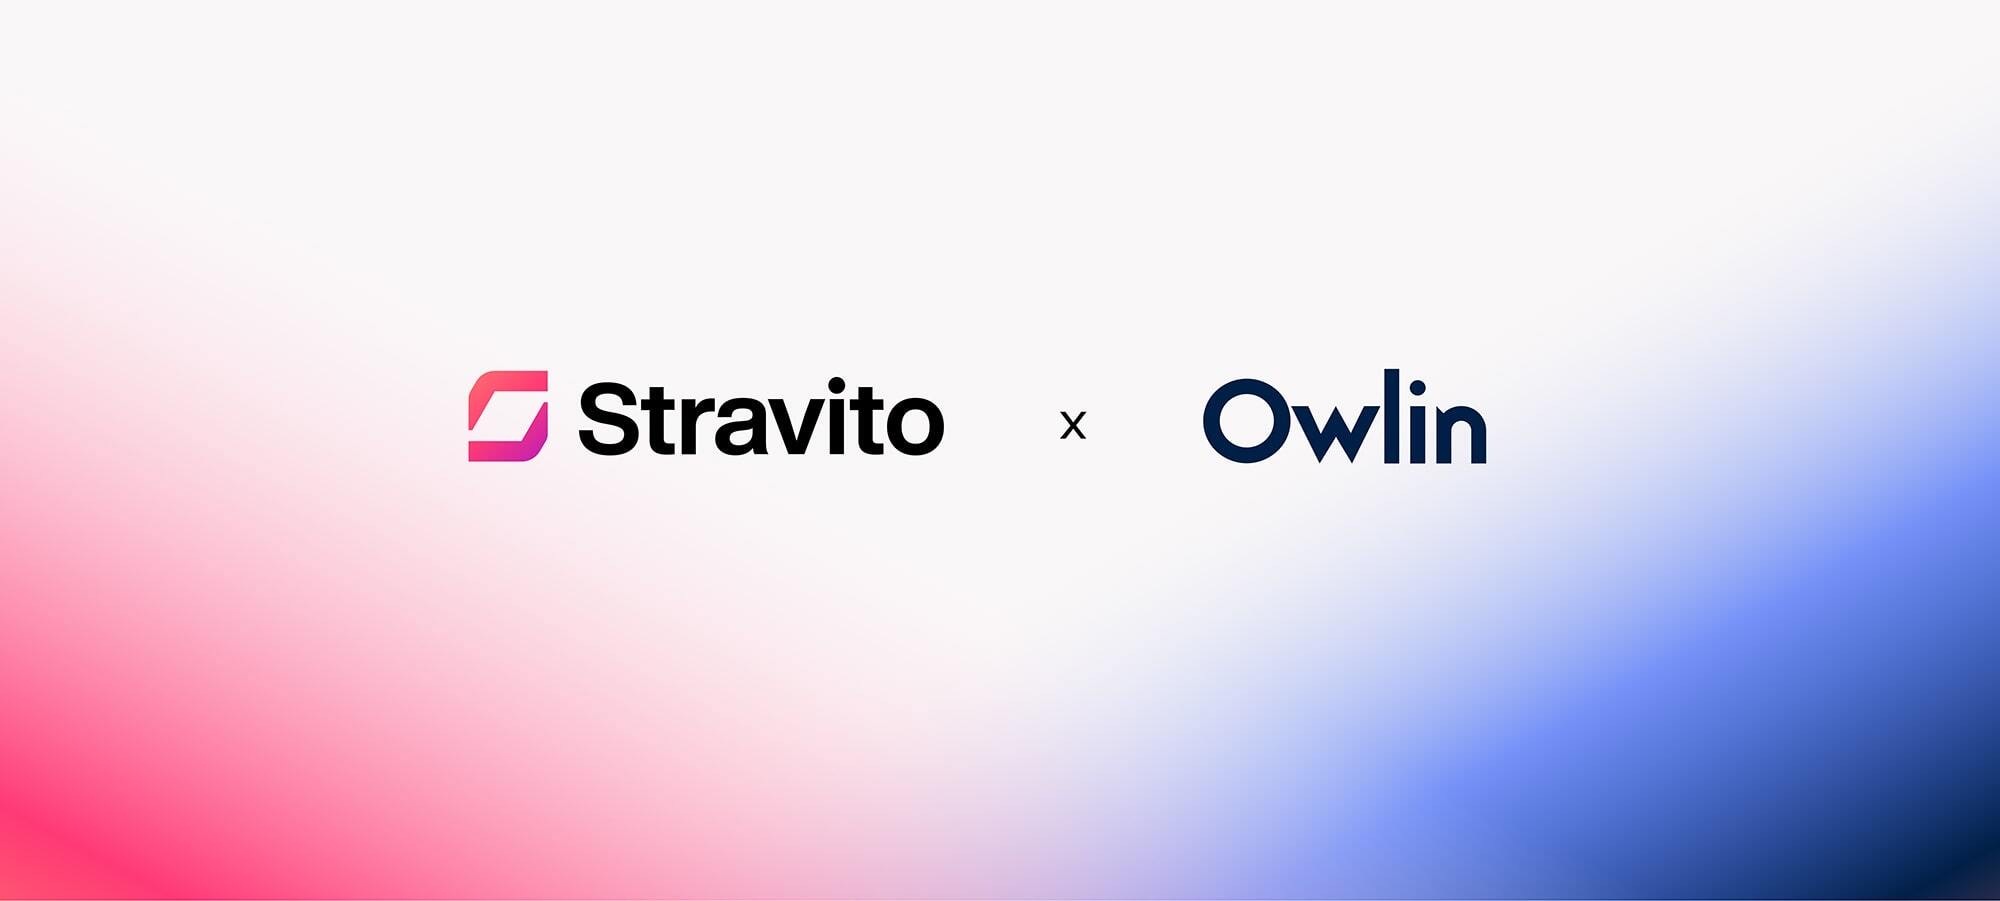 Stravito Knowledge Management and Competitive Intelligence platform